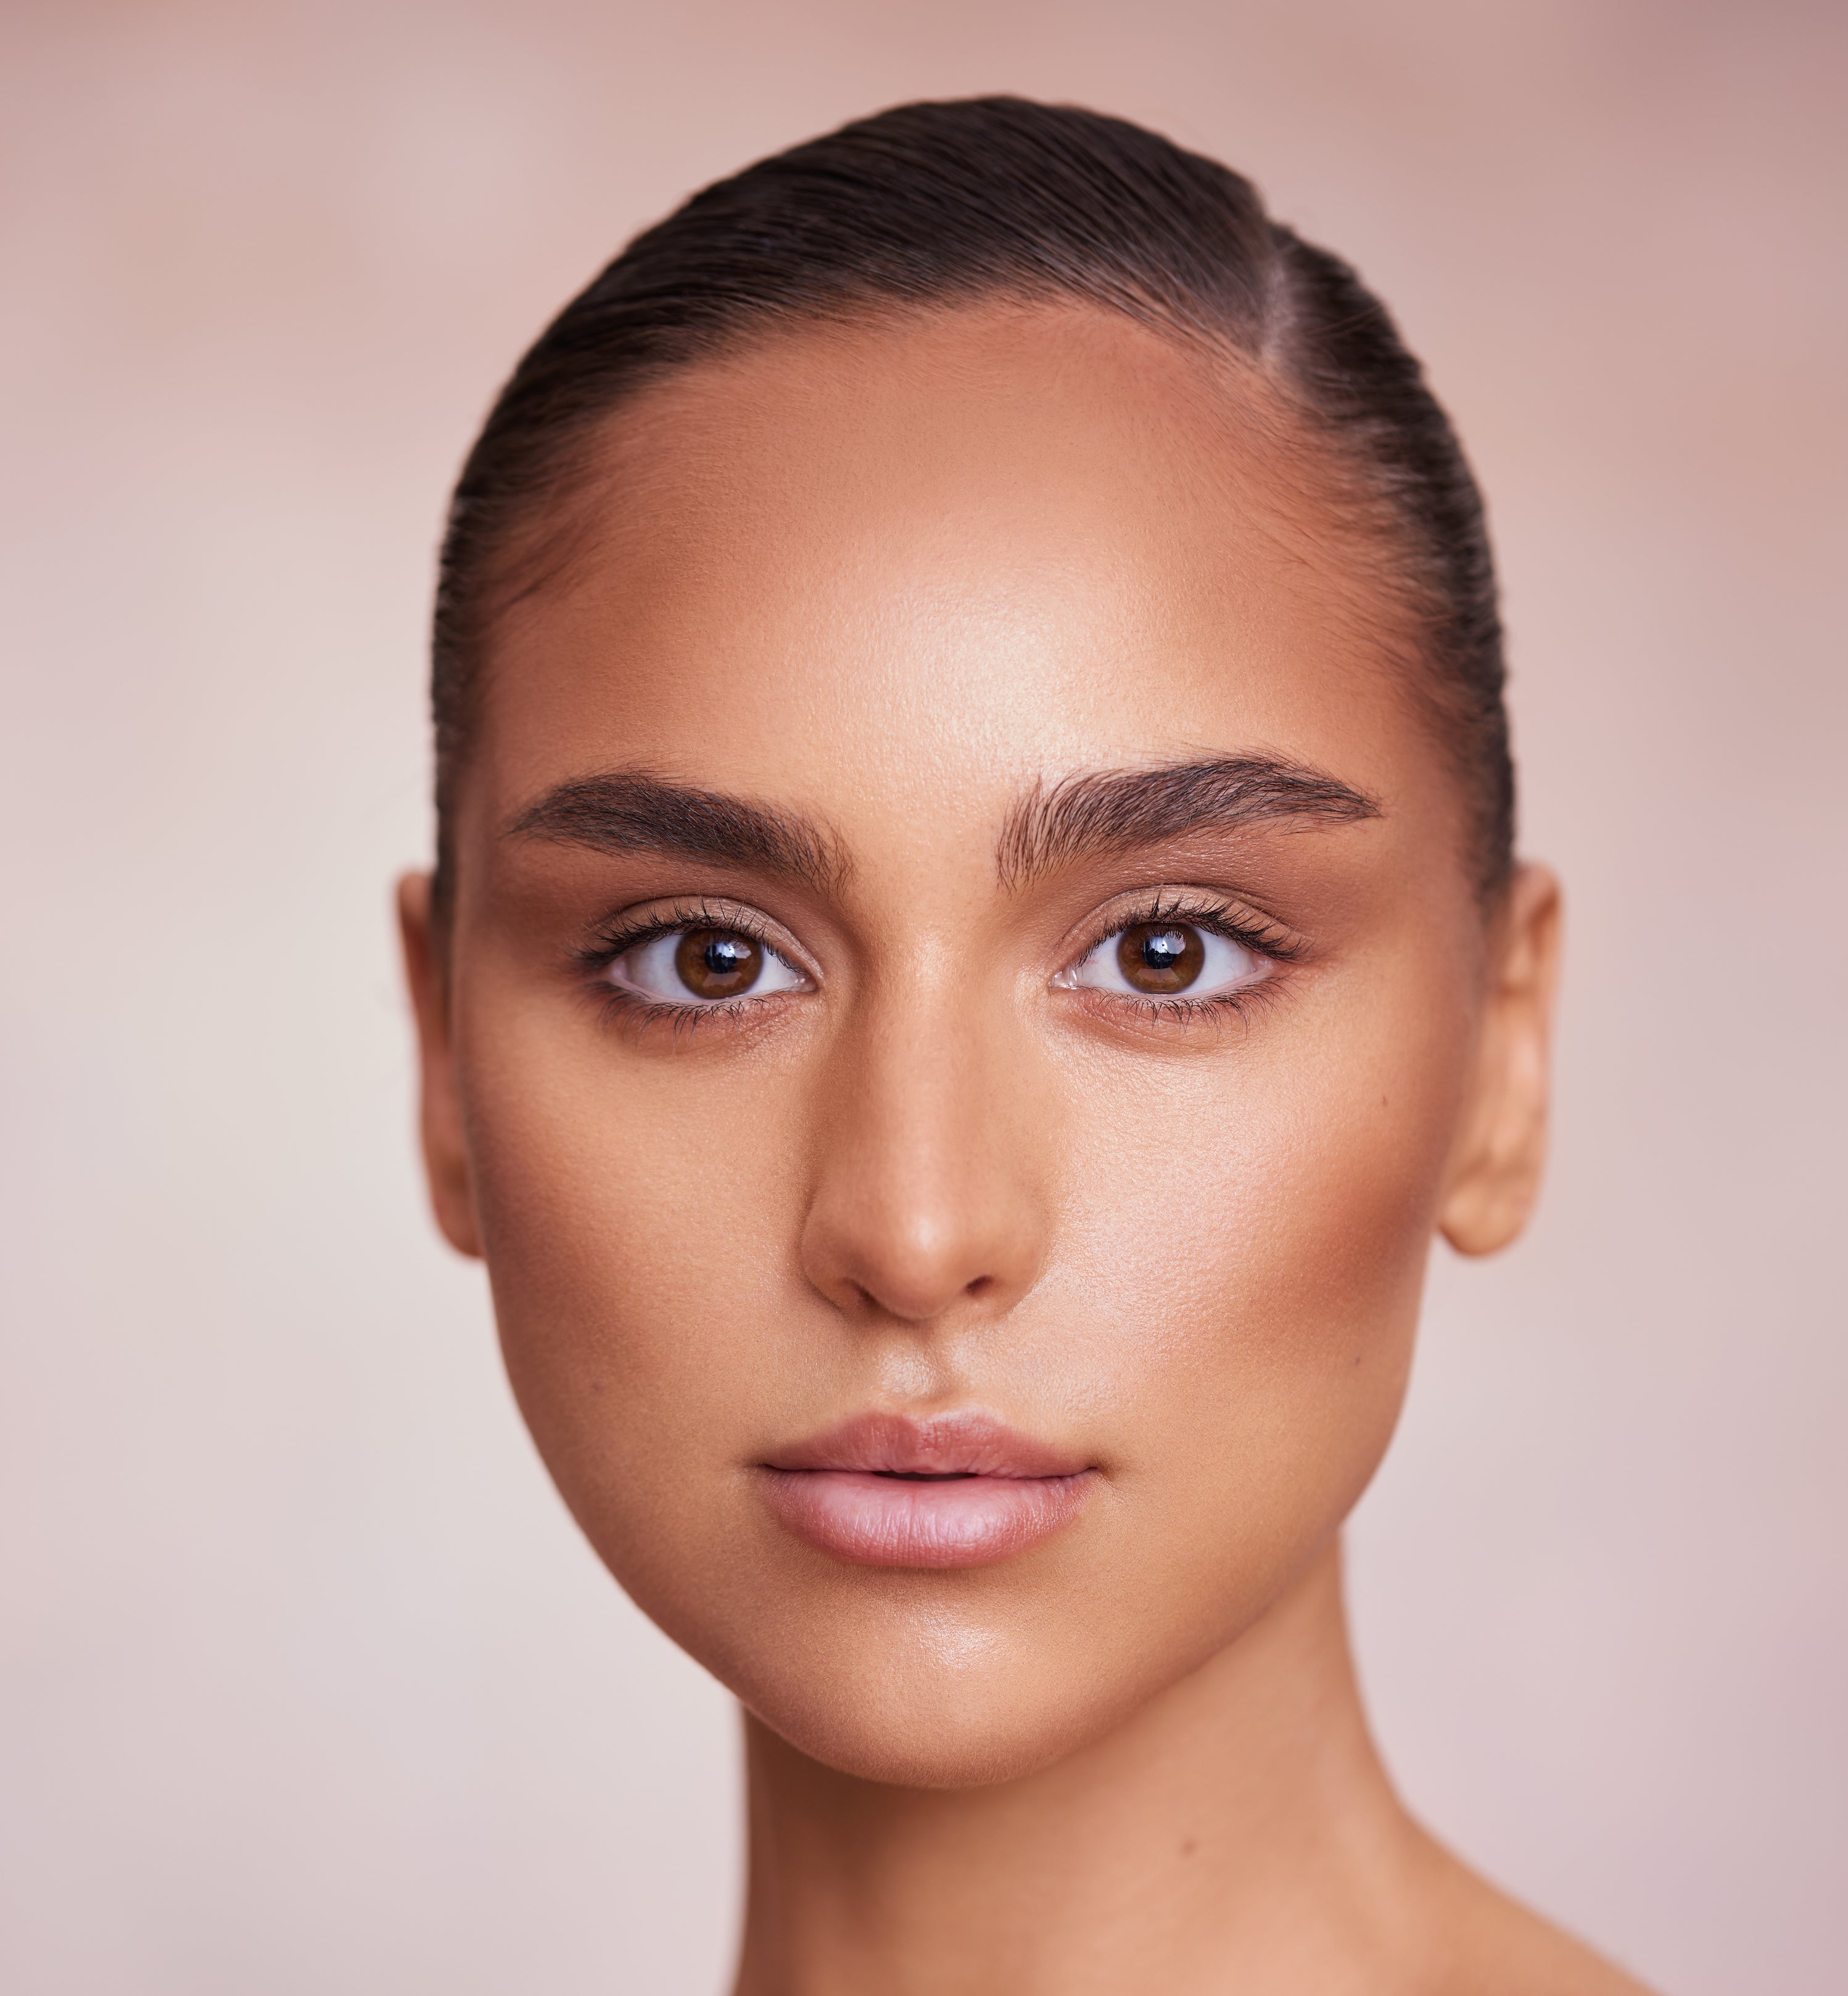 How To Contour & Highlight Based On Your Face Shape